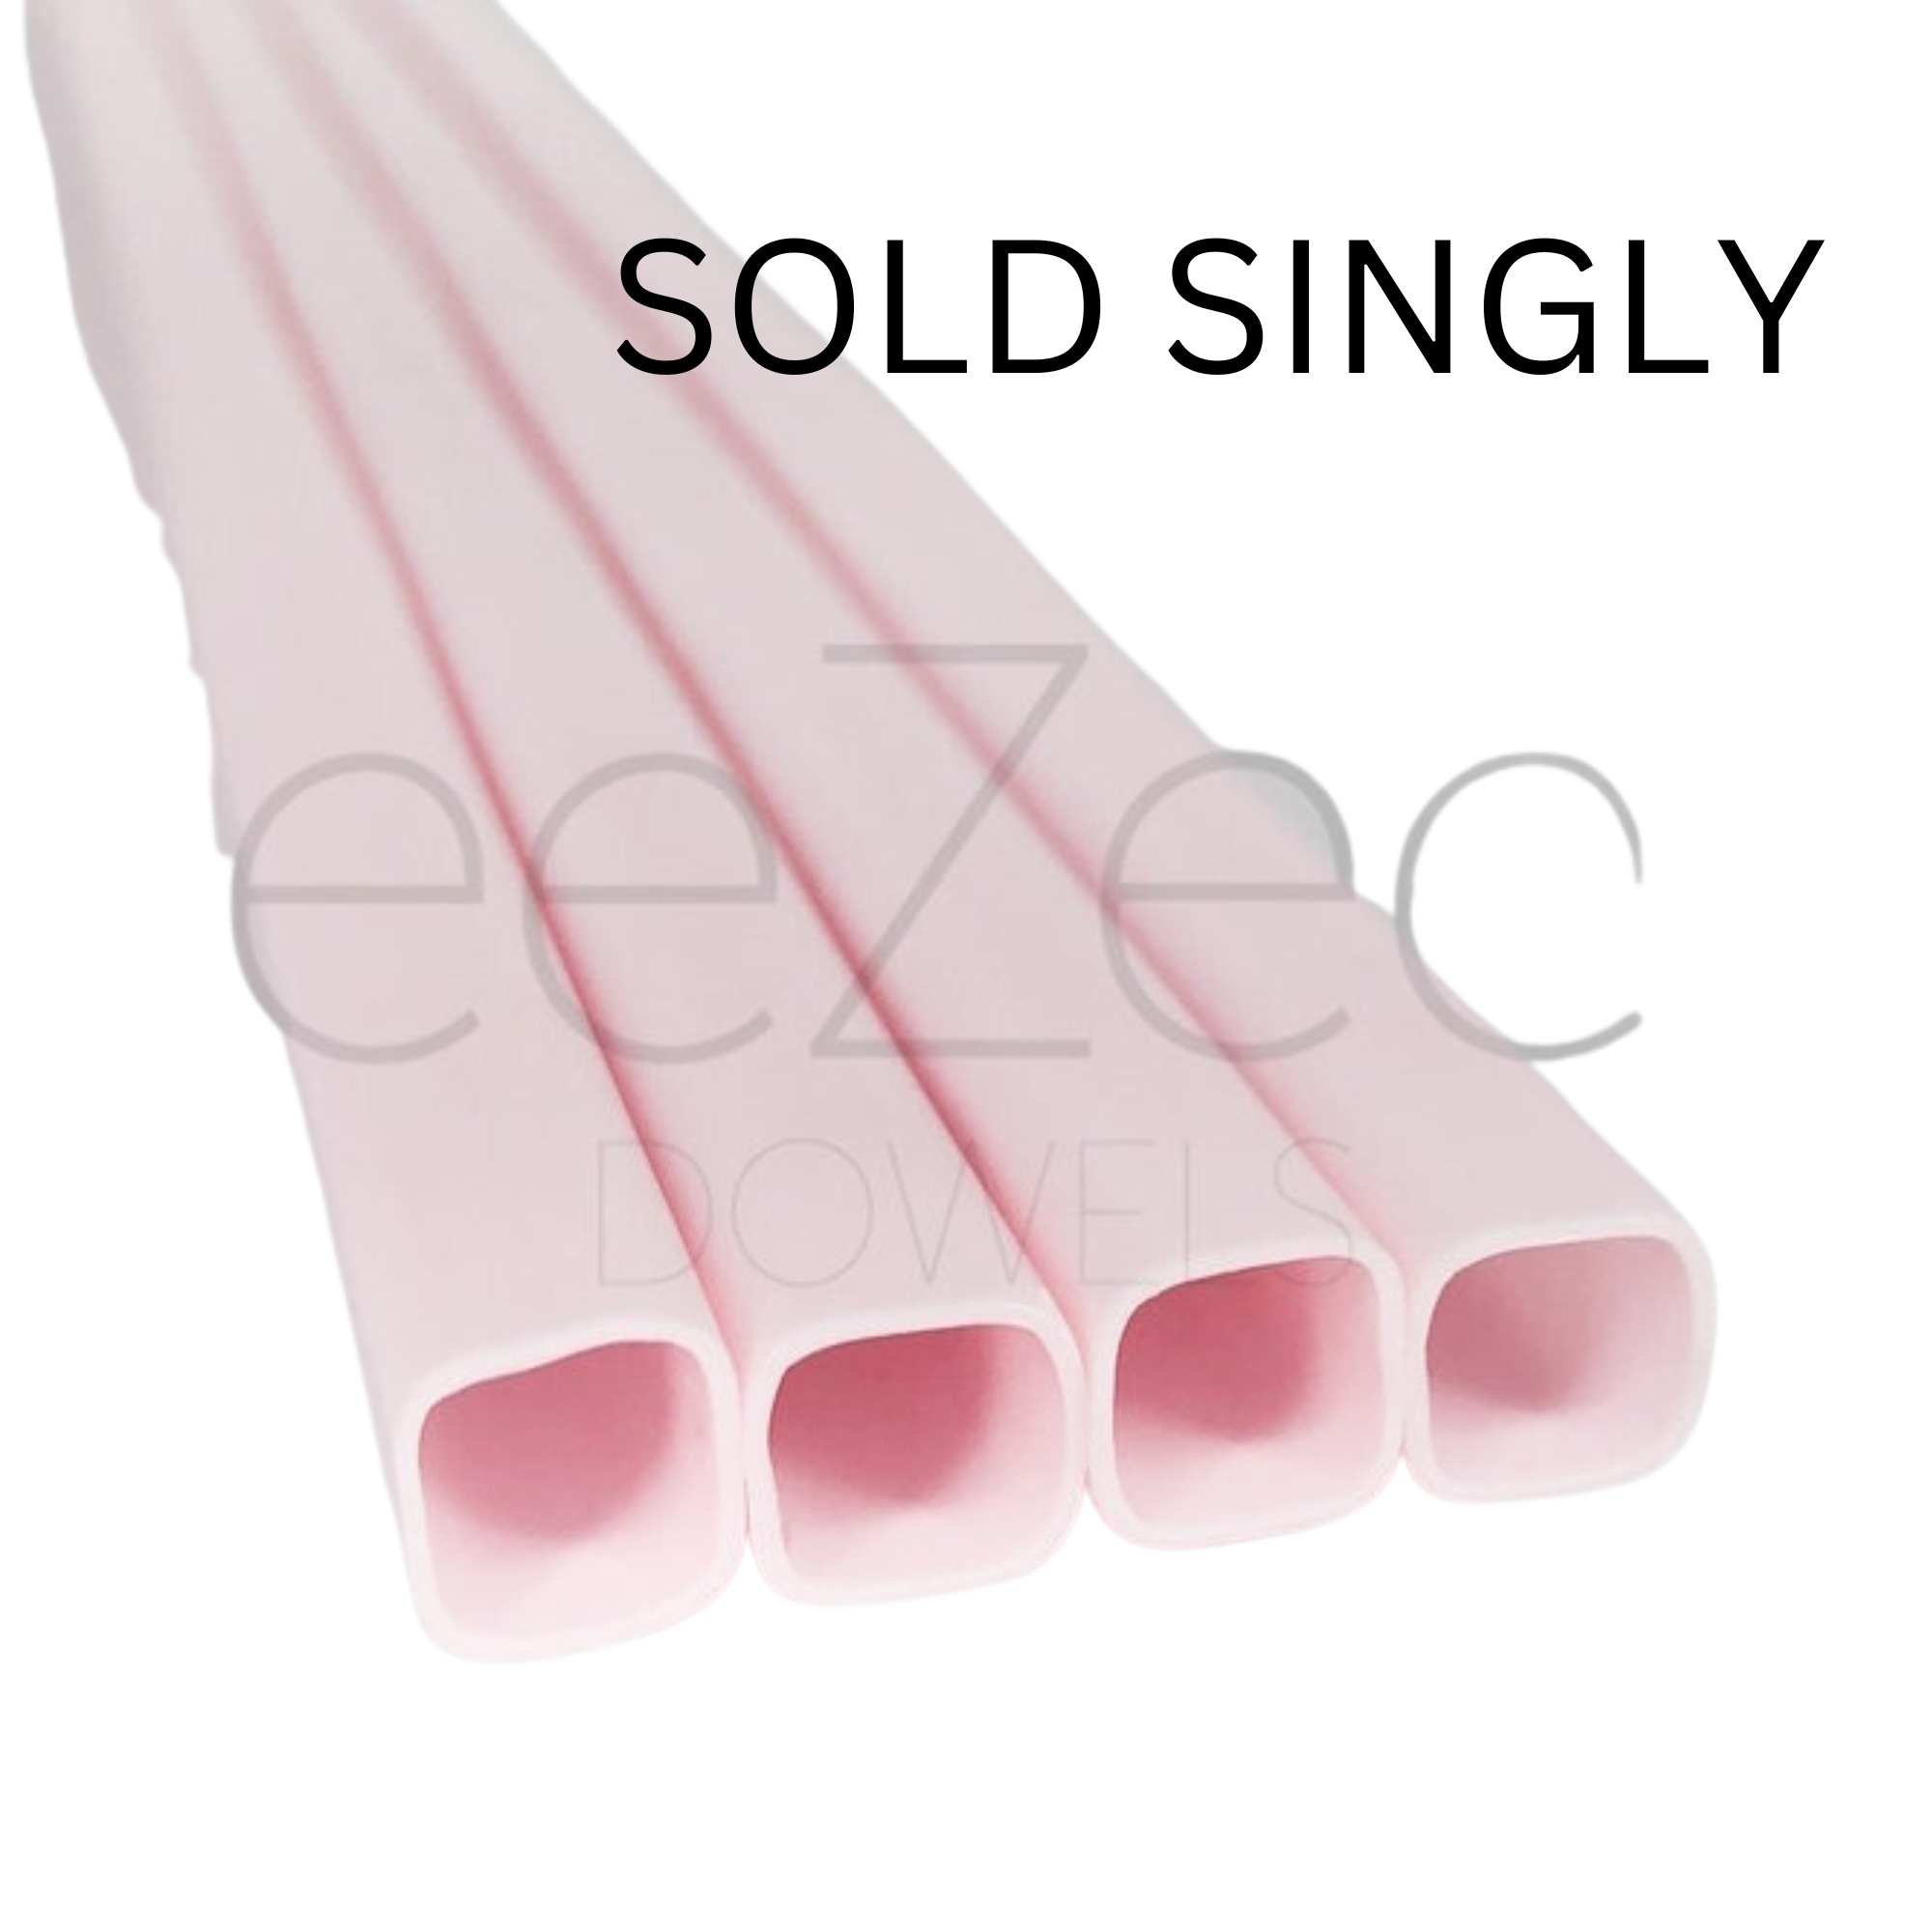 EeZee Pink Square Dowel 12" Cake Support Stick - Sold Singly